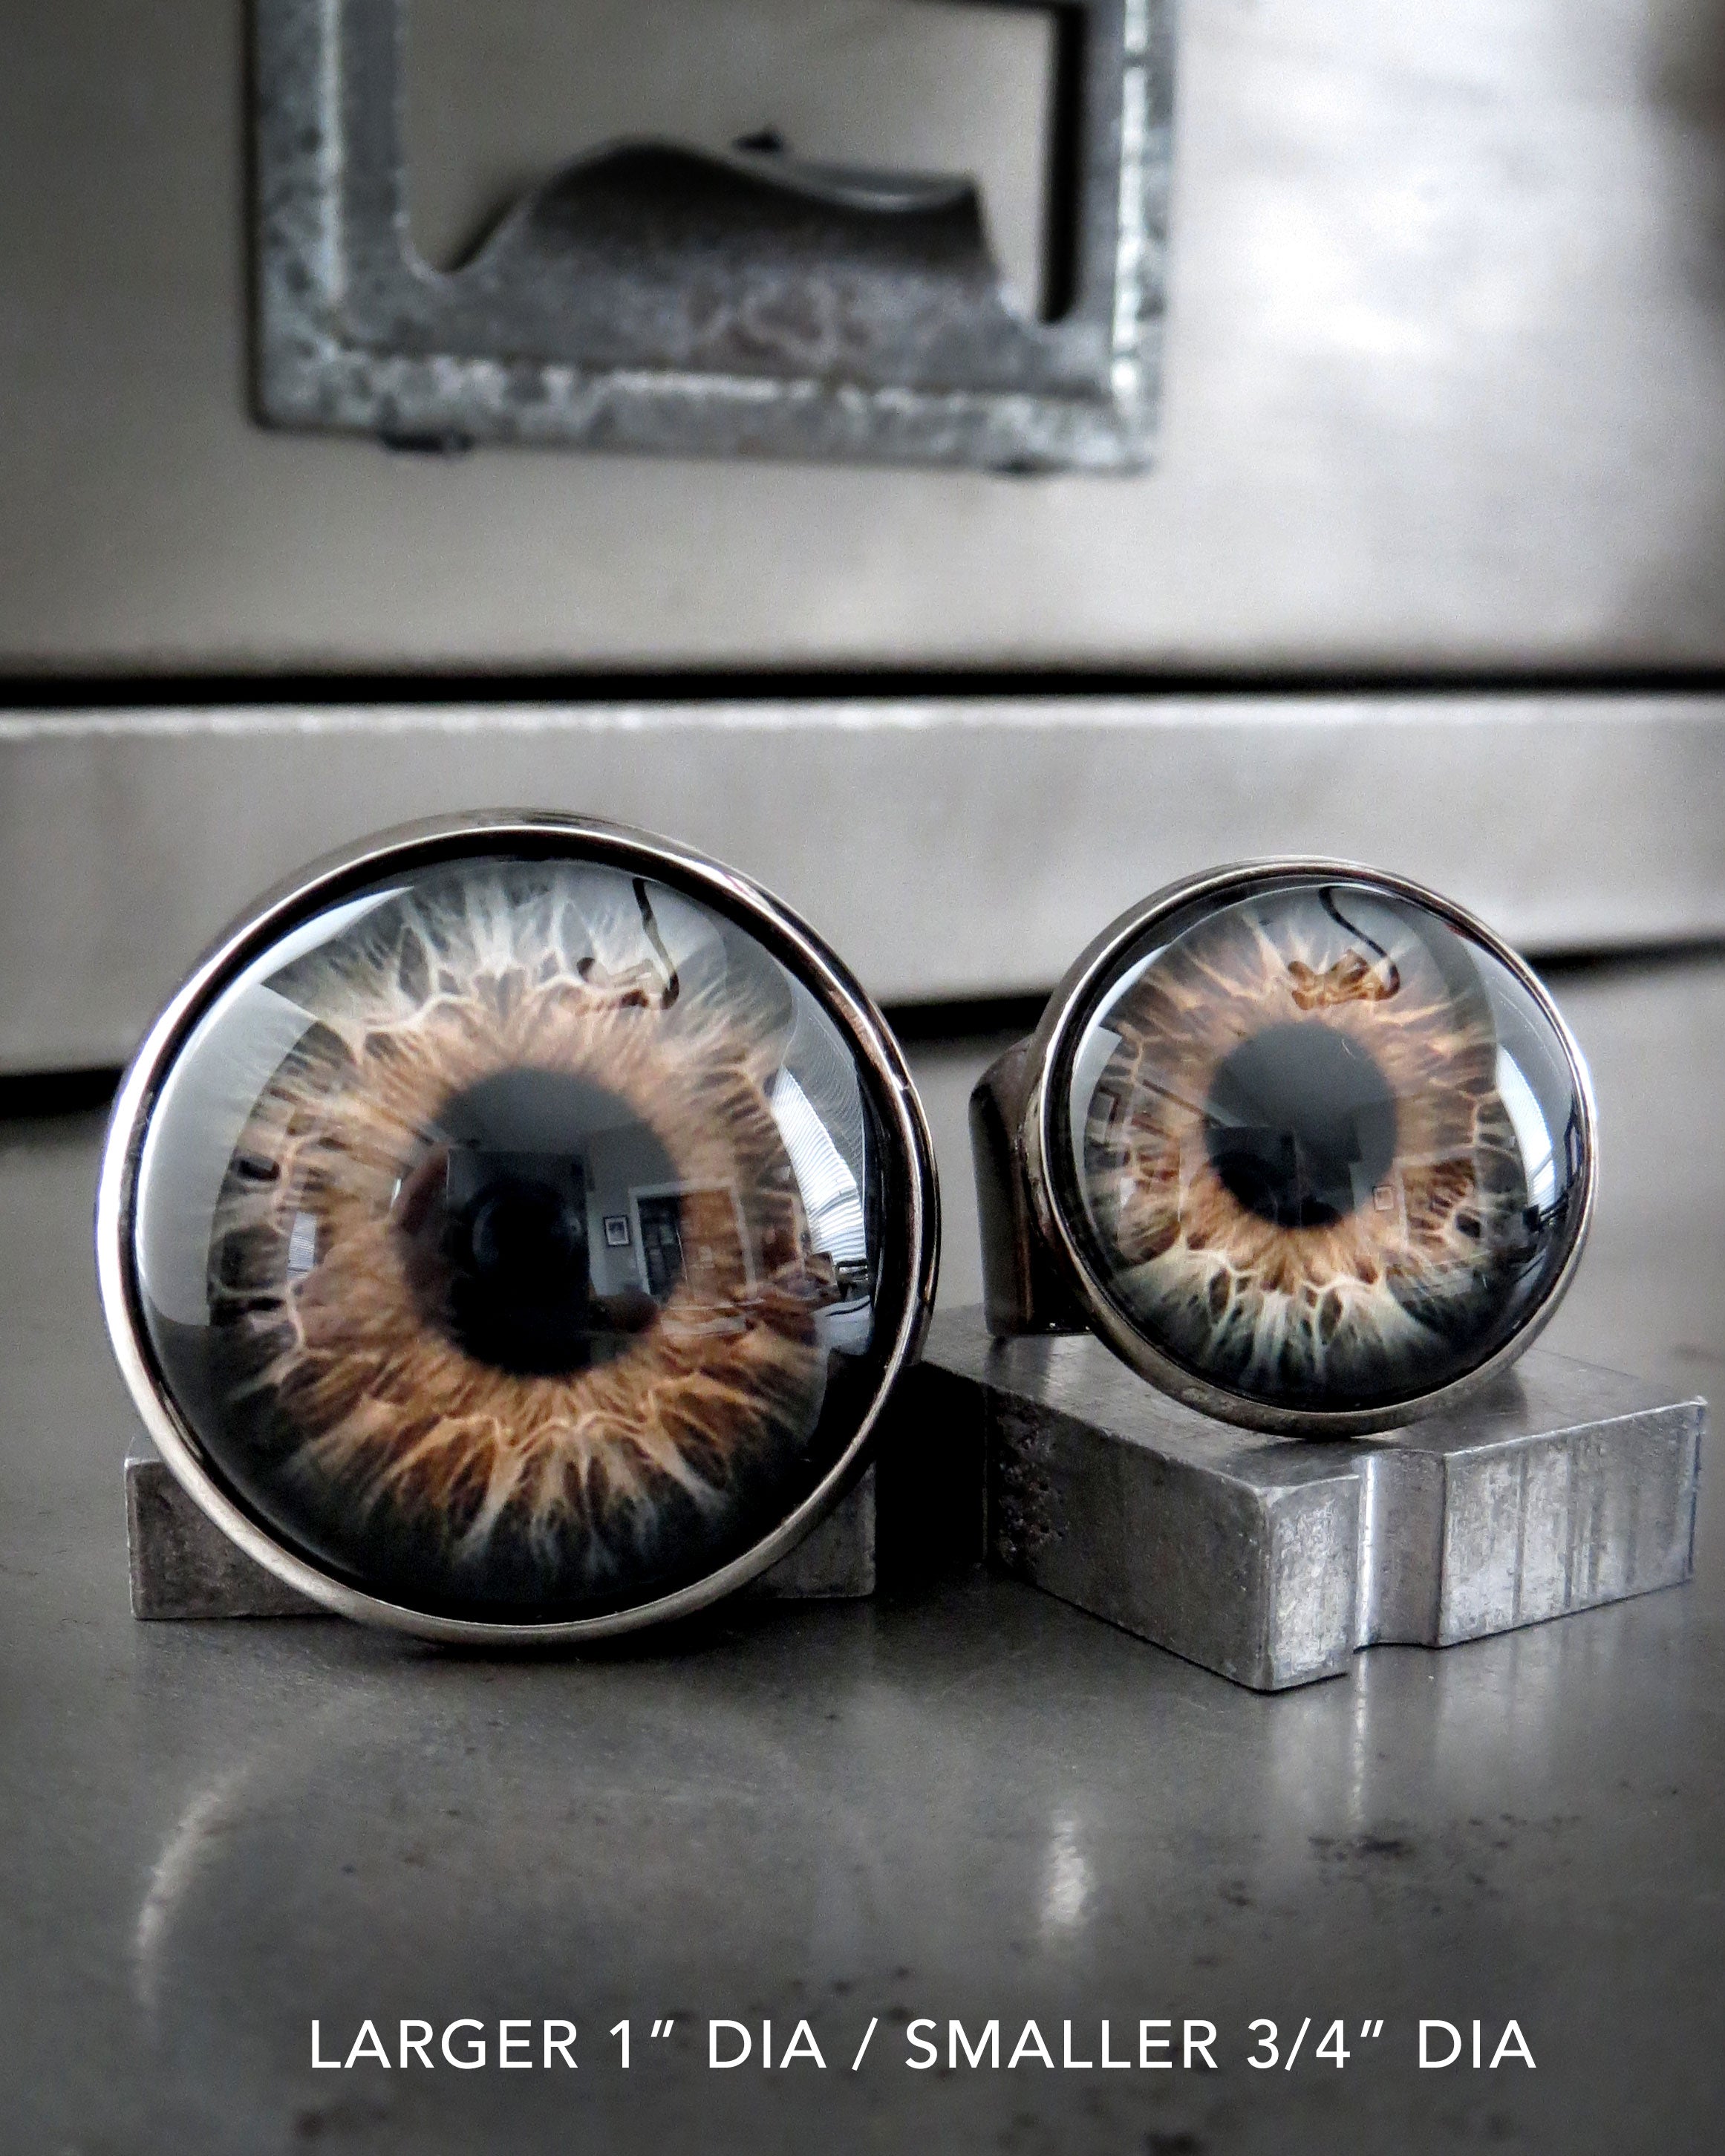 Halloween Eyeball Ring with Realistic Brown Eye - Two Sizes